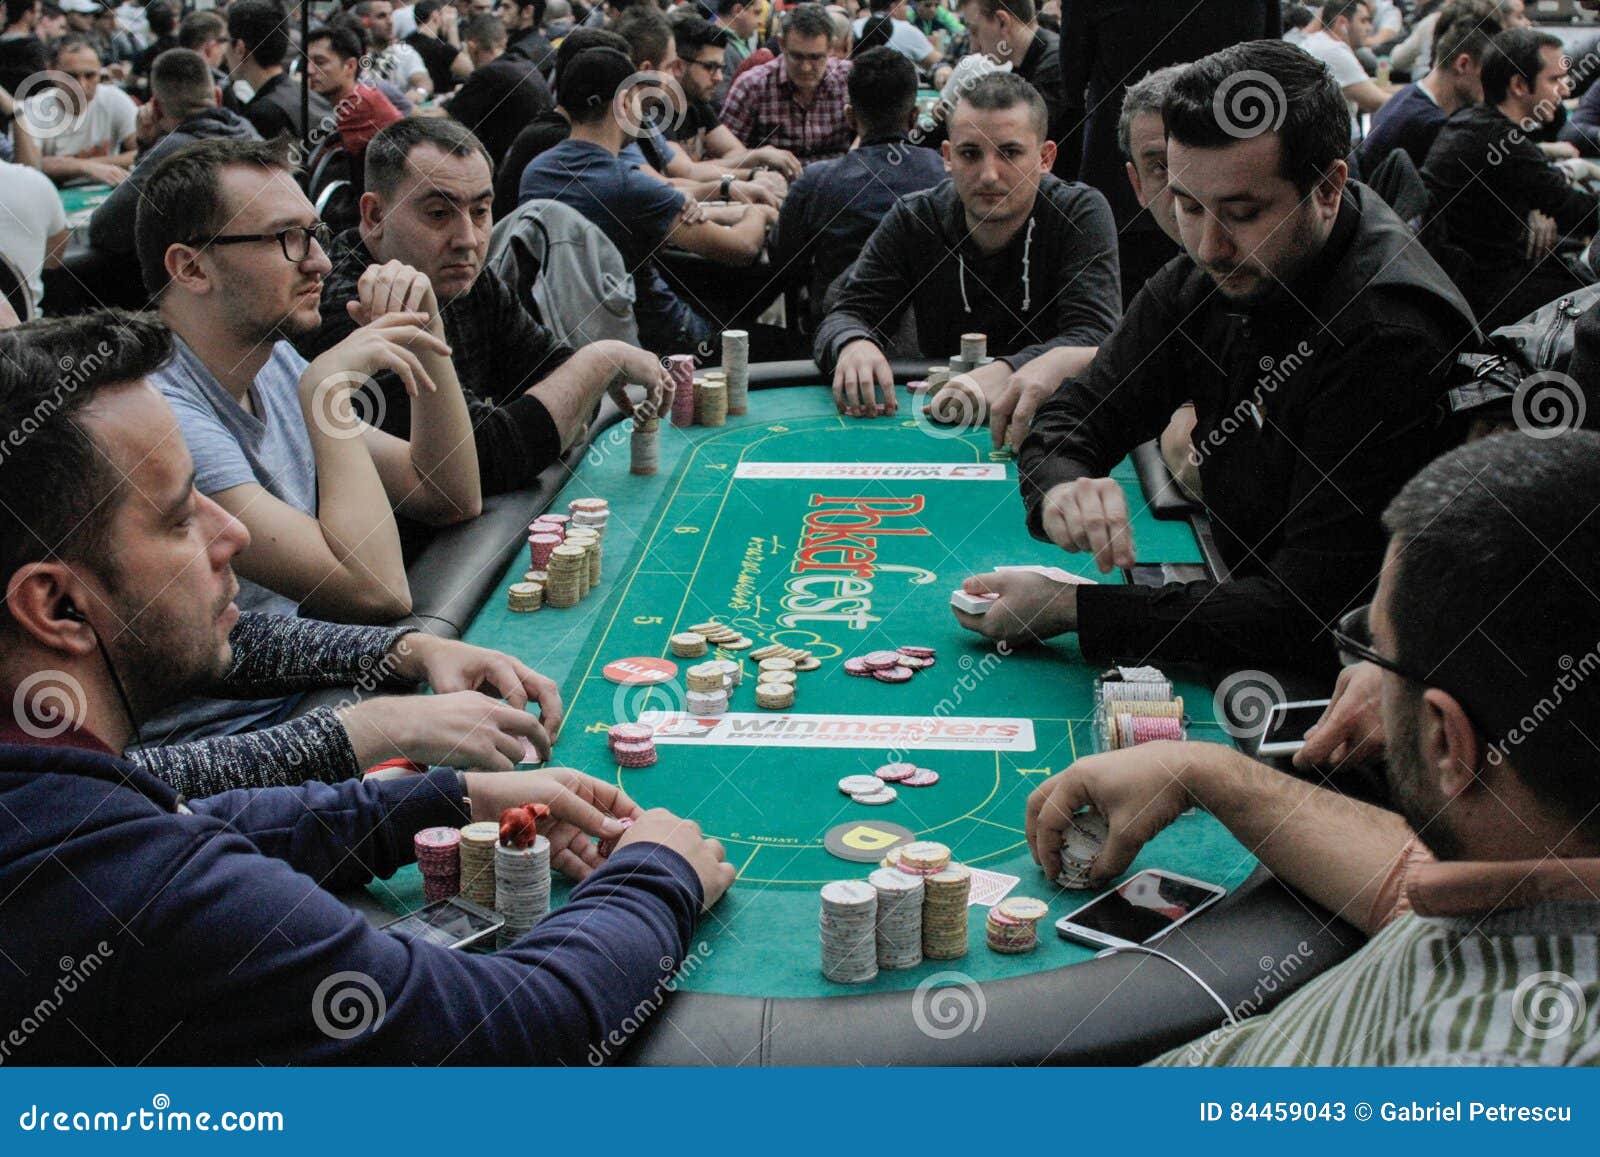 expand groove moustache 171 Many Gamblers Stock Photos - Free & Royalty-Free Stock Photos from  Dreamstime - Page 3